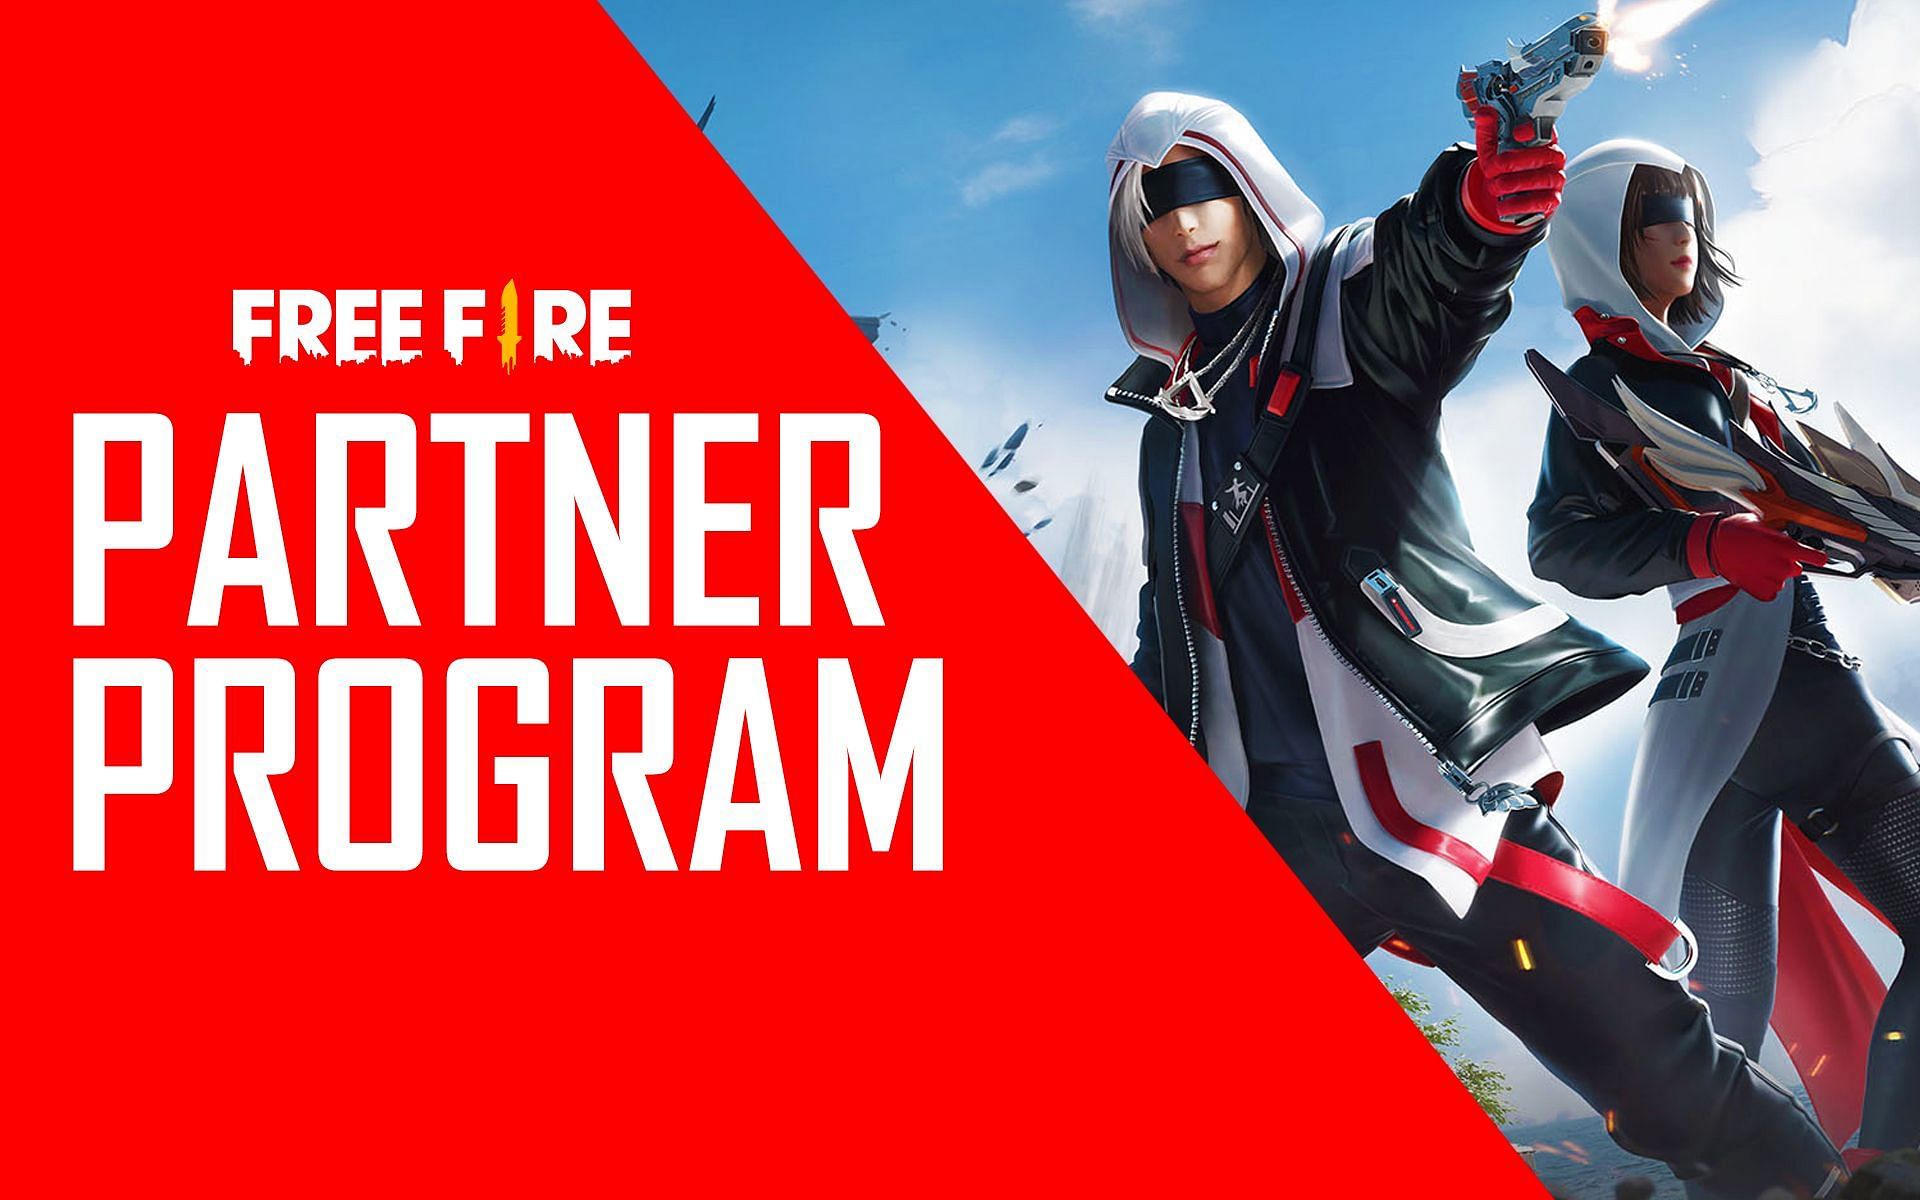 Players can join the Free Fire Partner Program for exclusive benefits (Image via Sportskeeda)